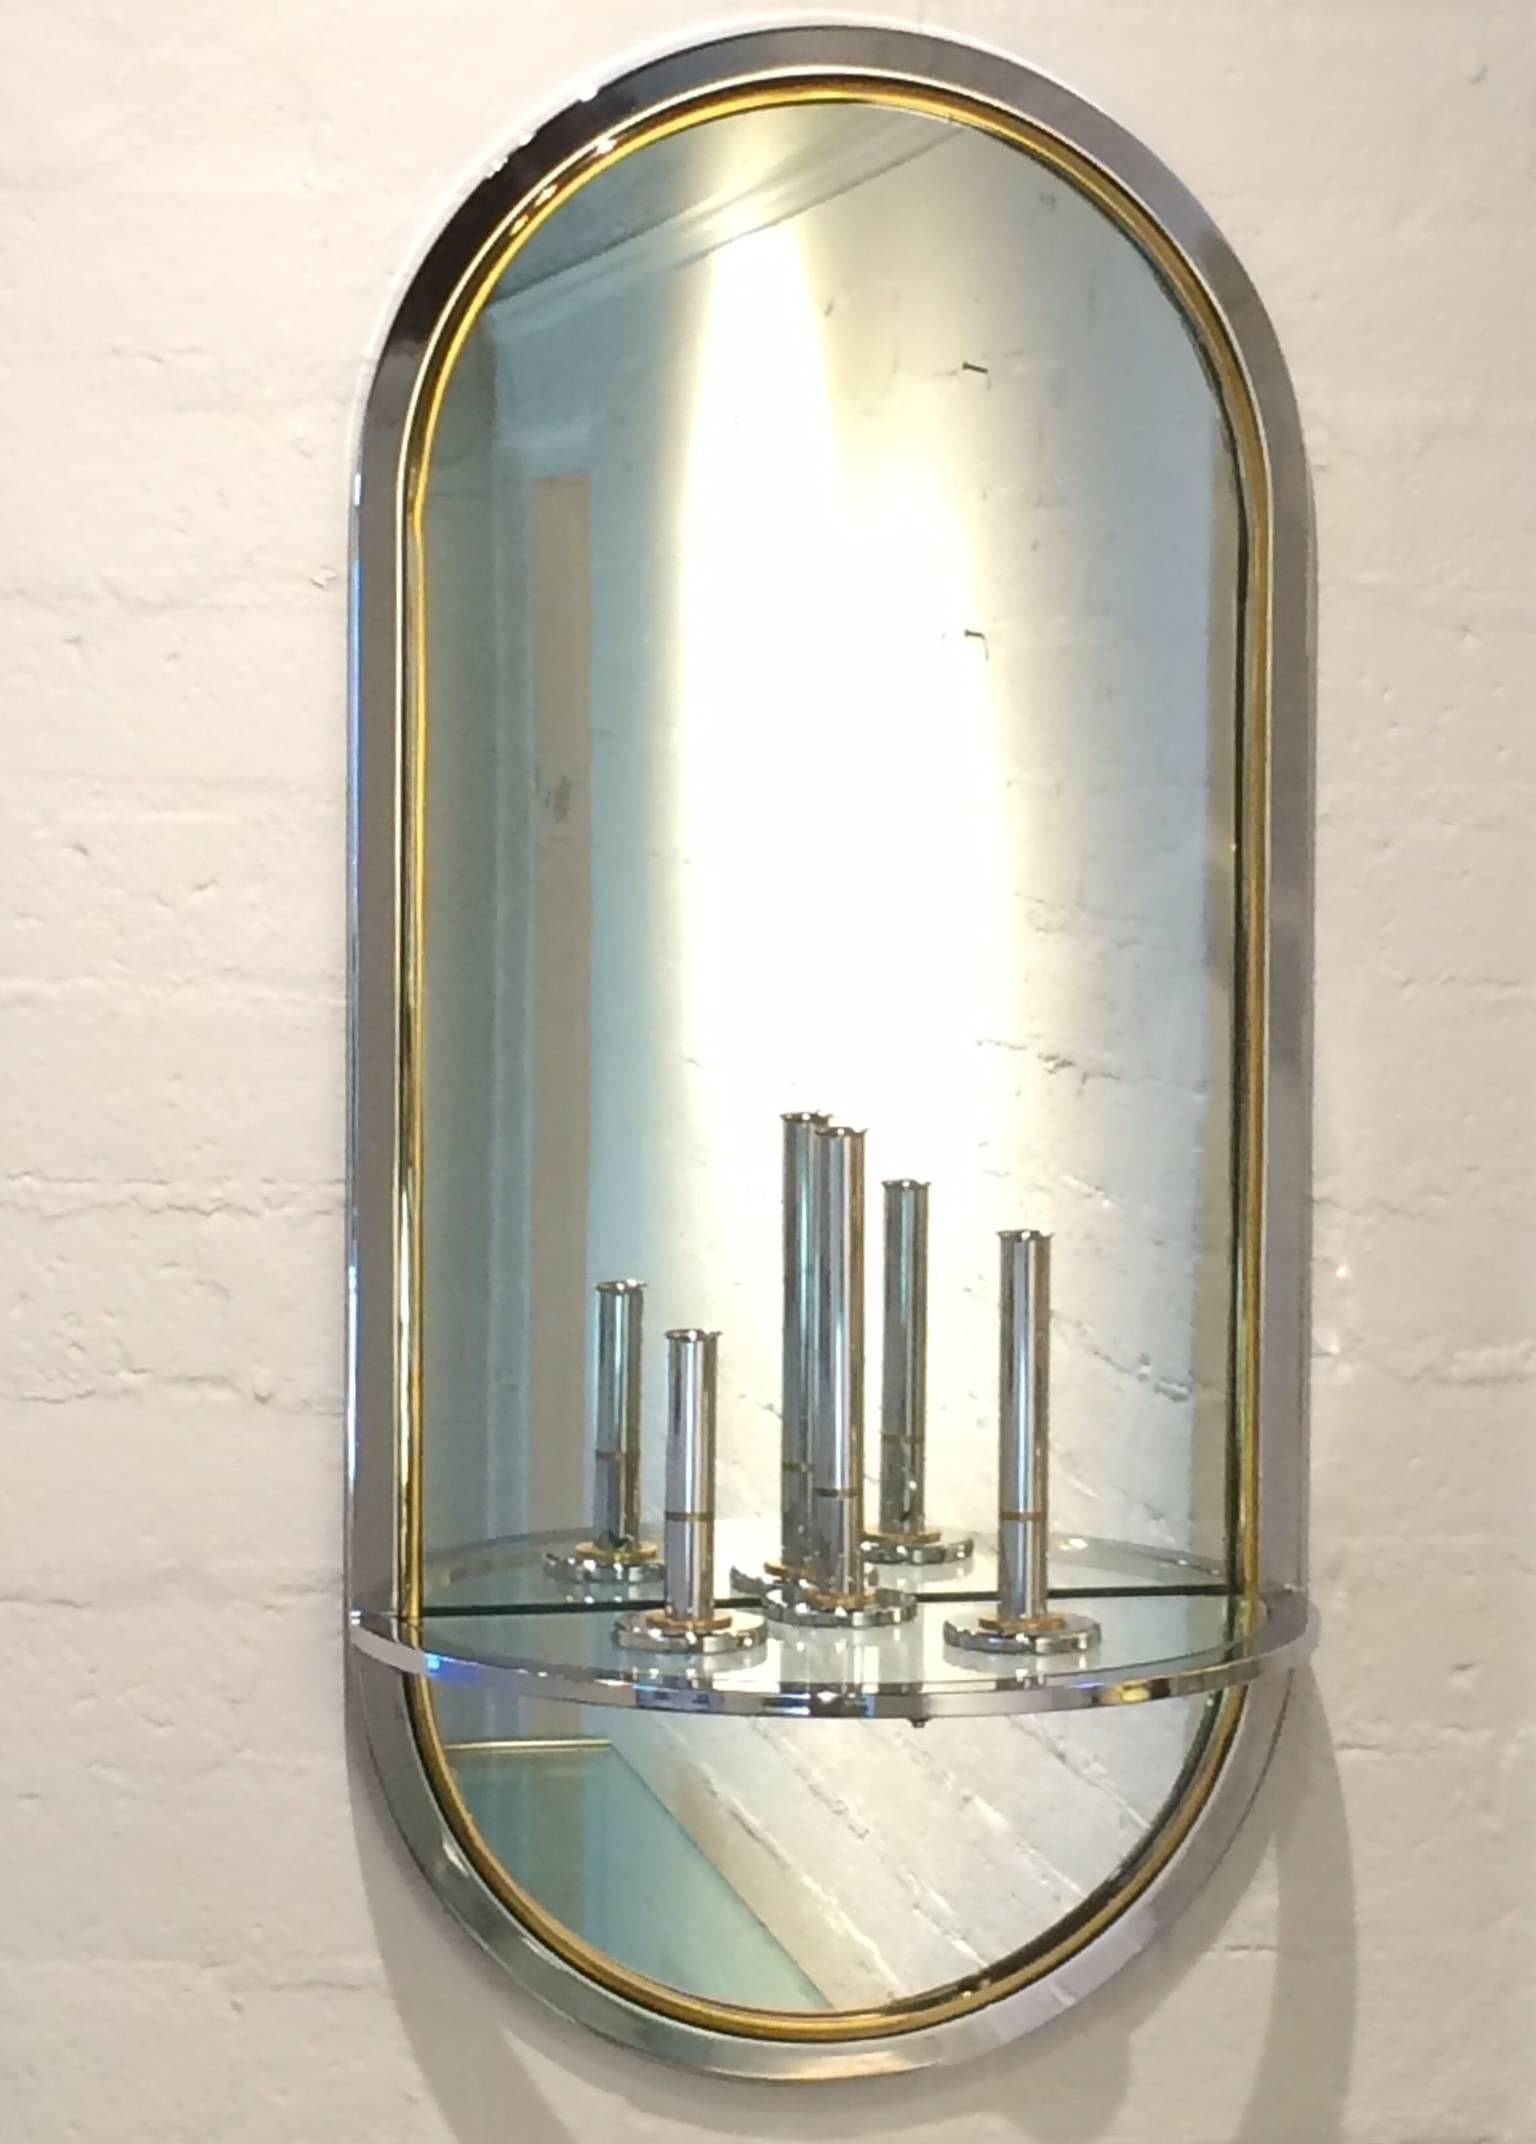 Racetrack shaped wall mirror with glass inset demilune shelf.
Framed with a chrome and brass band. 
Made by Pace Collection.